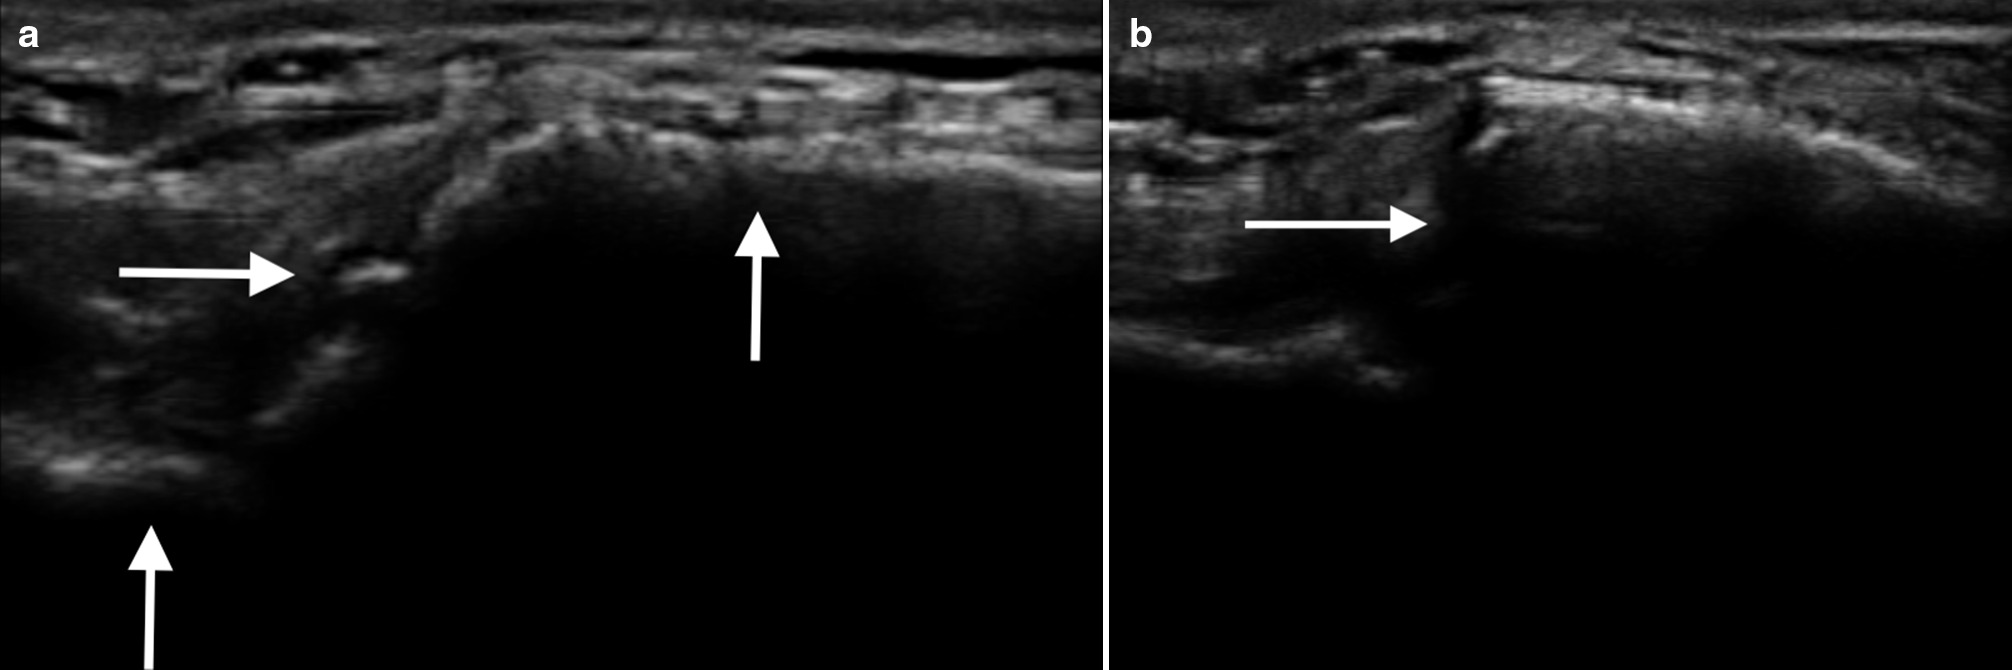 Fig. 2 
            a) Ultrasound example of six week bridging callus. Cortical surface of bone (vertical arrows), bridging callus (horizontal arrow). Note acoustic shadow below surface of bone. b) Example of anisotropy or loss of ultrasound signal during the same scan sequence. Orientation of the probe that is not perpendicular to the callus results in loss of signal of callus, as shown by the horizontal arrow.
          